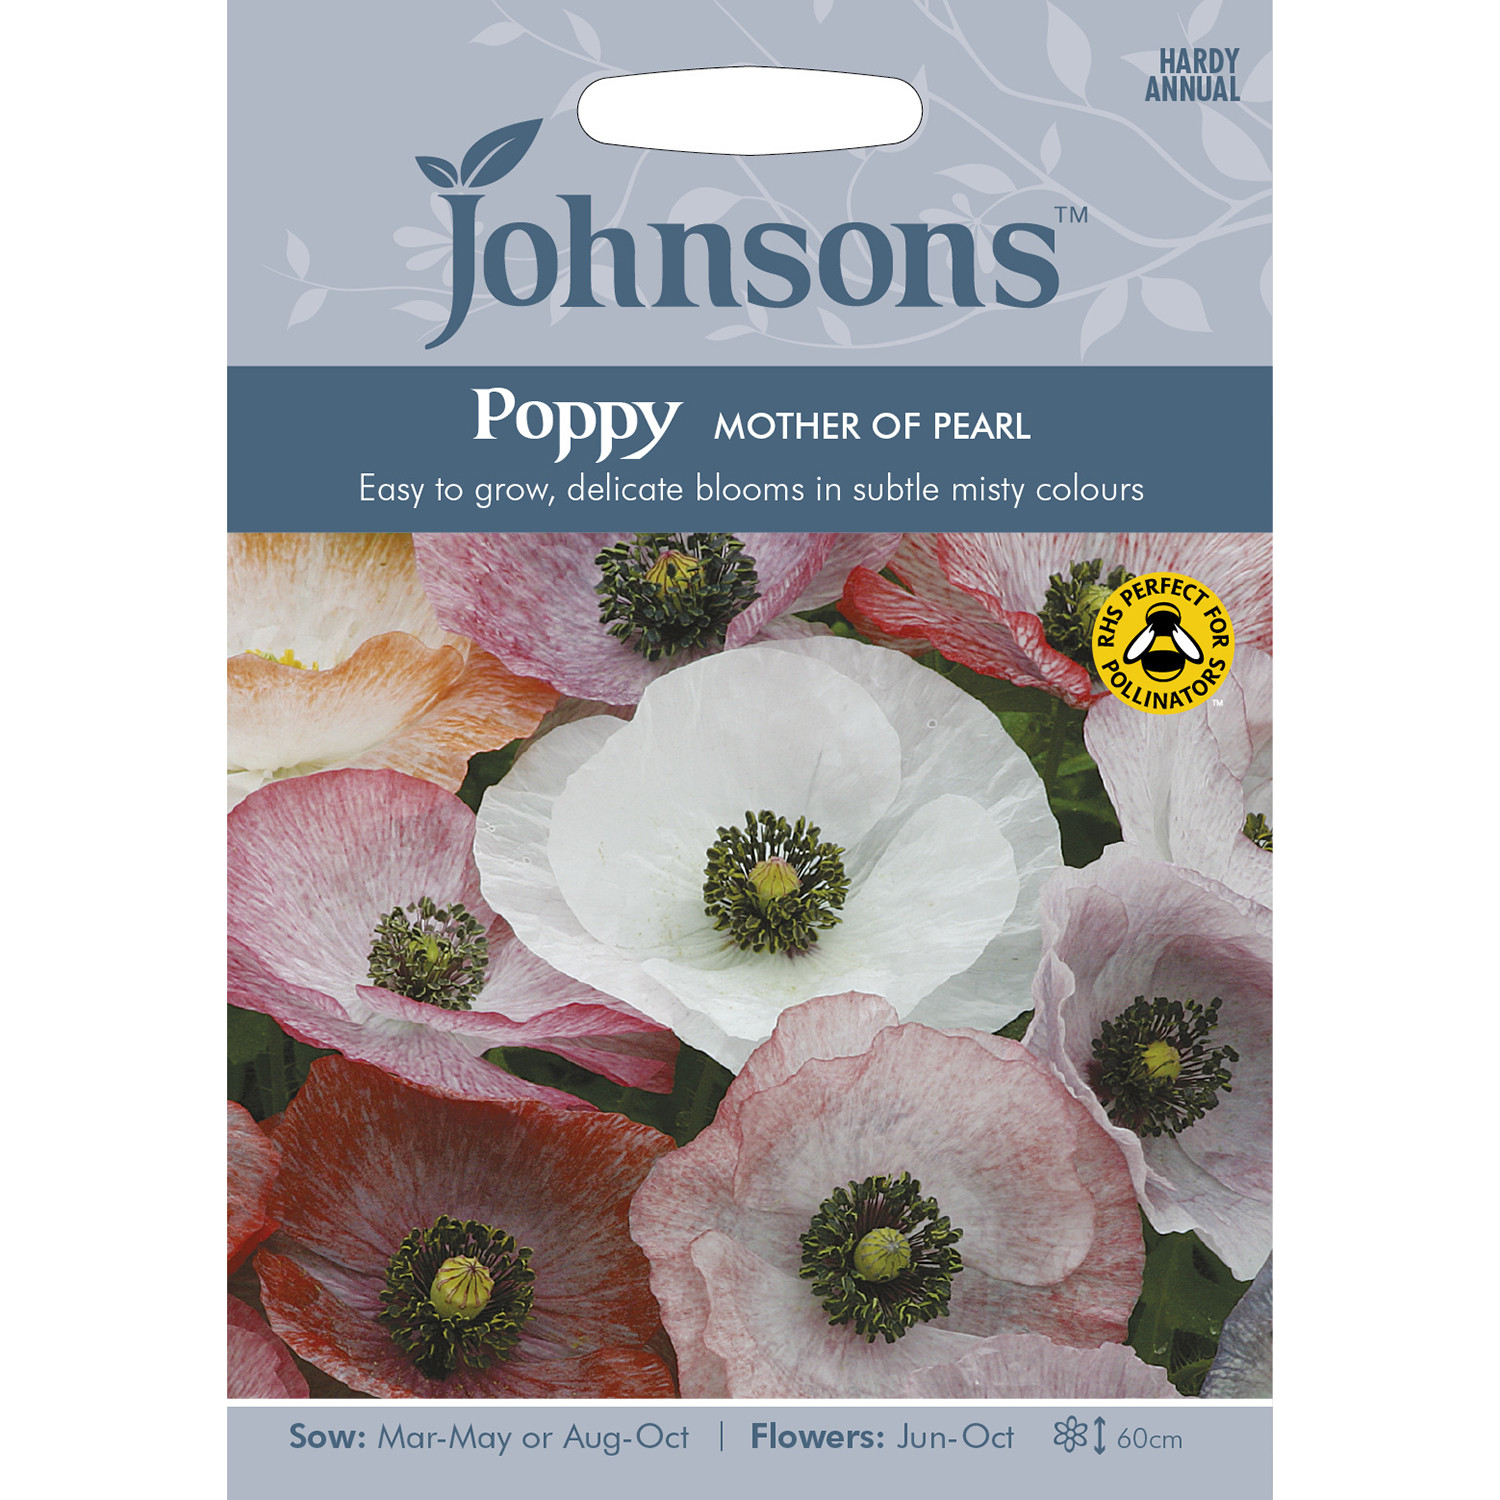 Johnsons Poppy Mother Of Pearl Flower Seeds Image 2